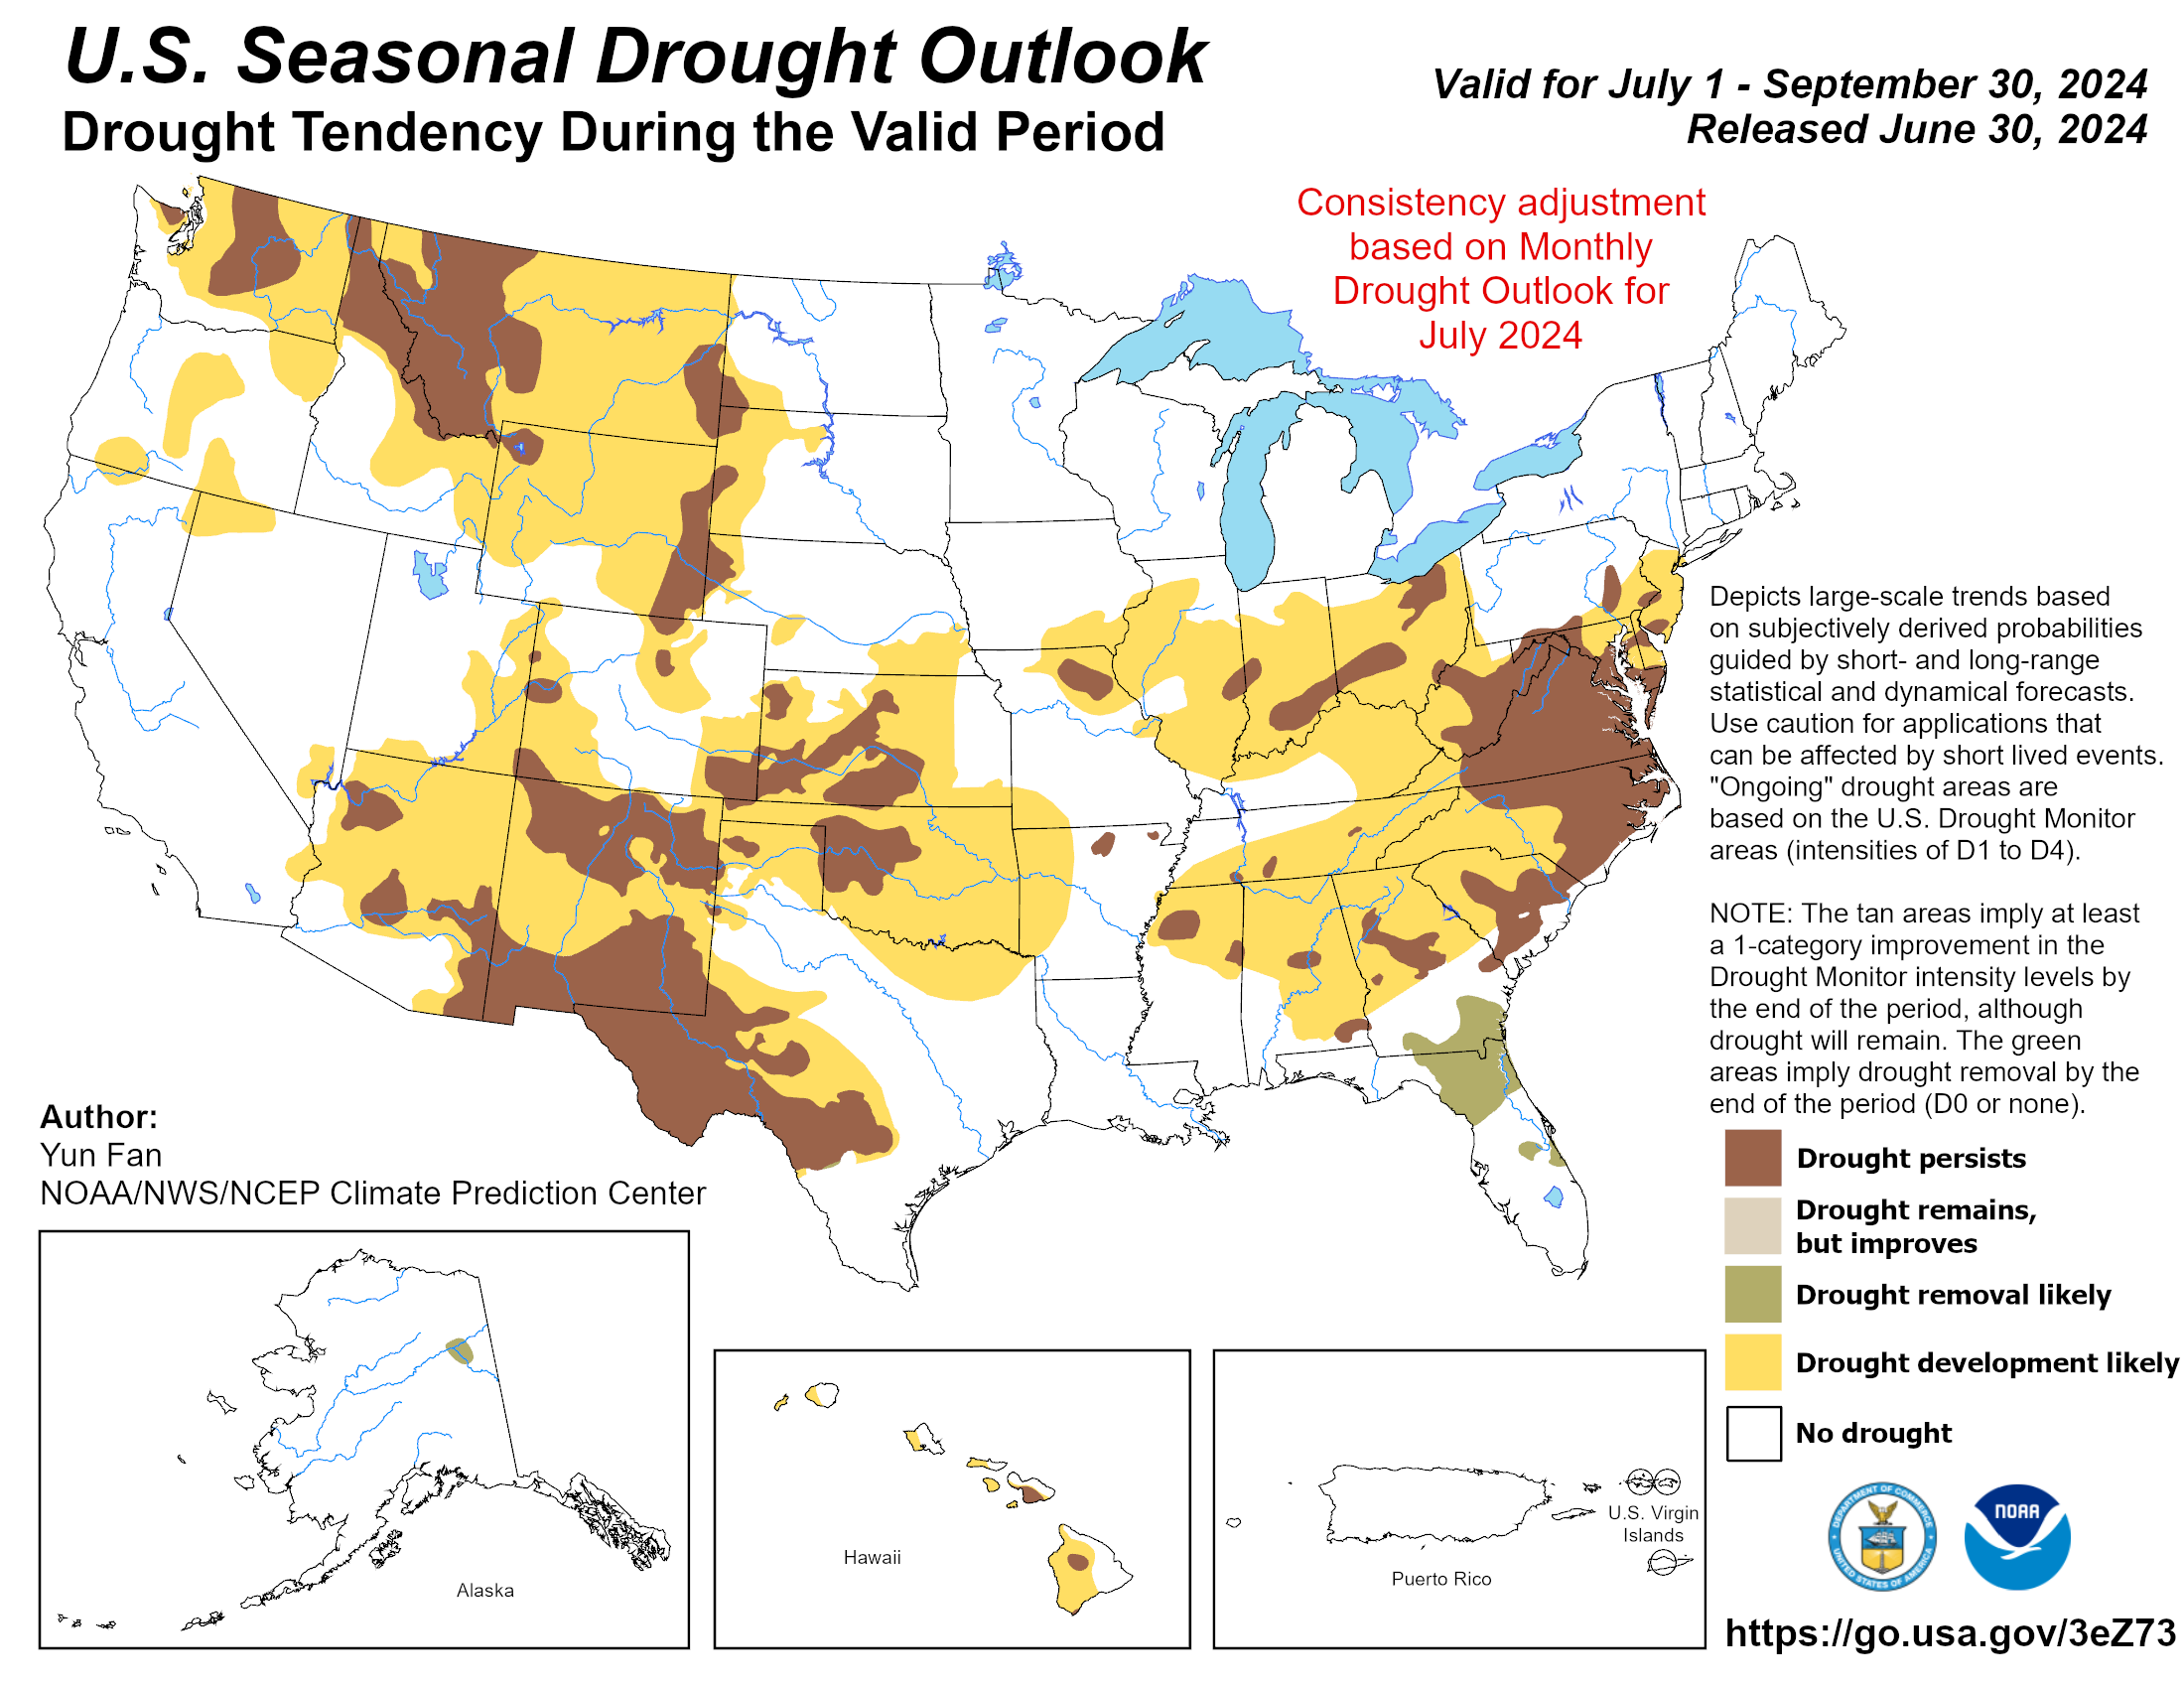 https://www.cpc.ncep.noaa.gov/products/expert_assessment/season_drought.png